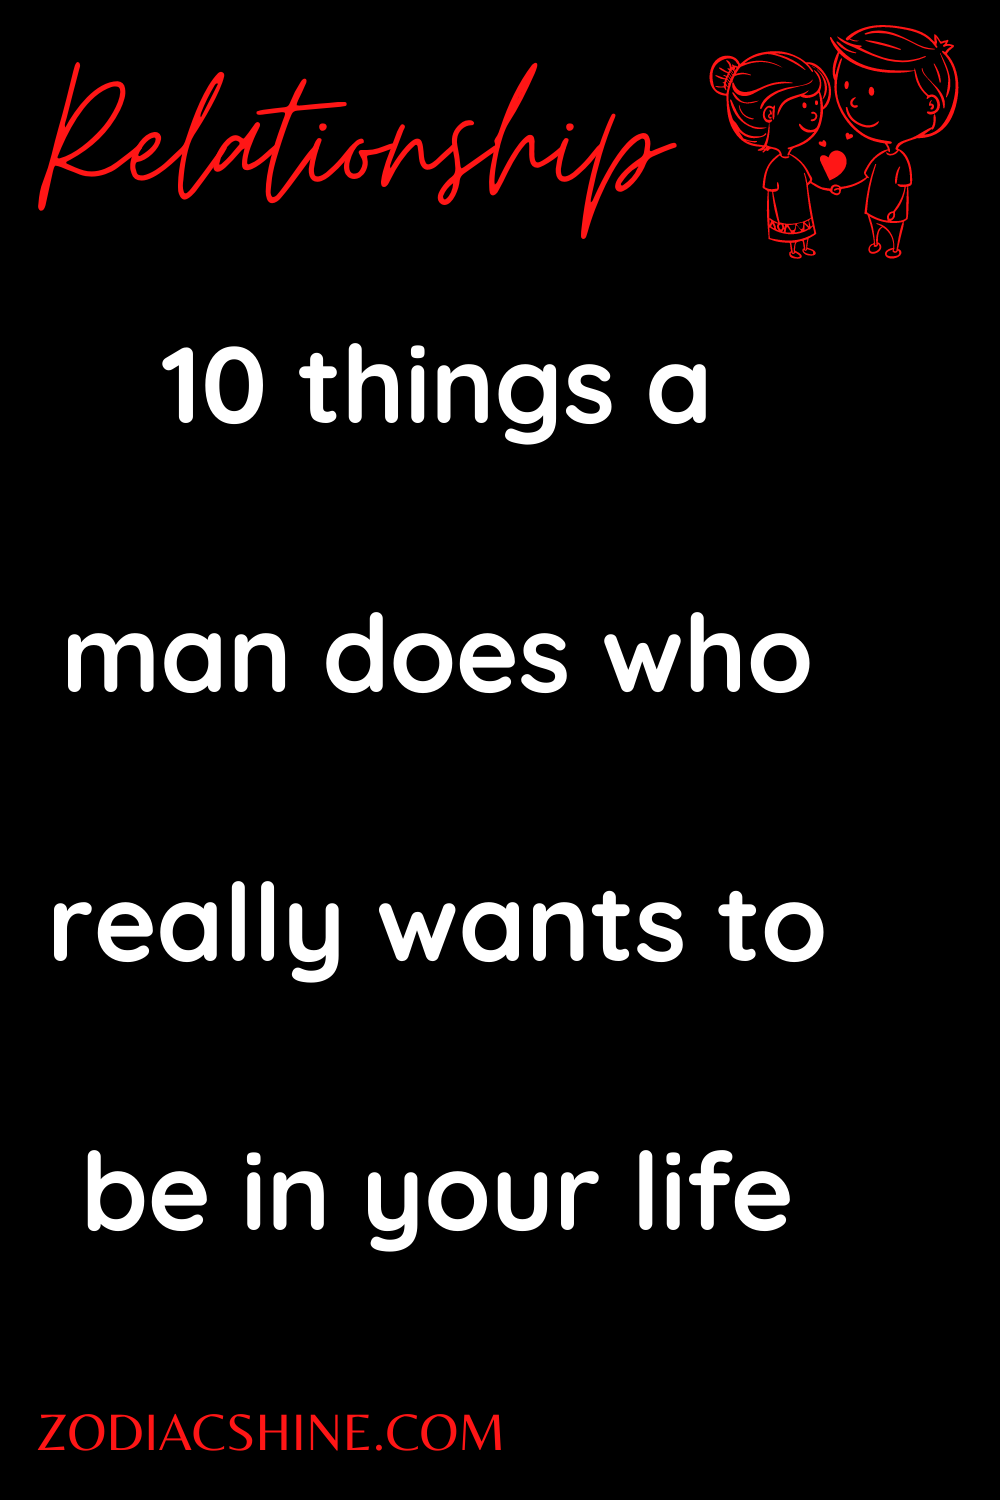 10 things a man does who really wants to be in your life